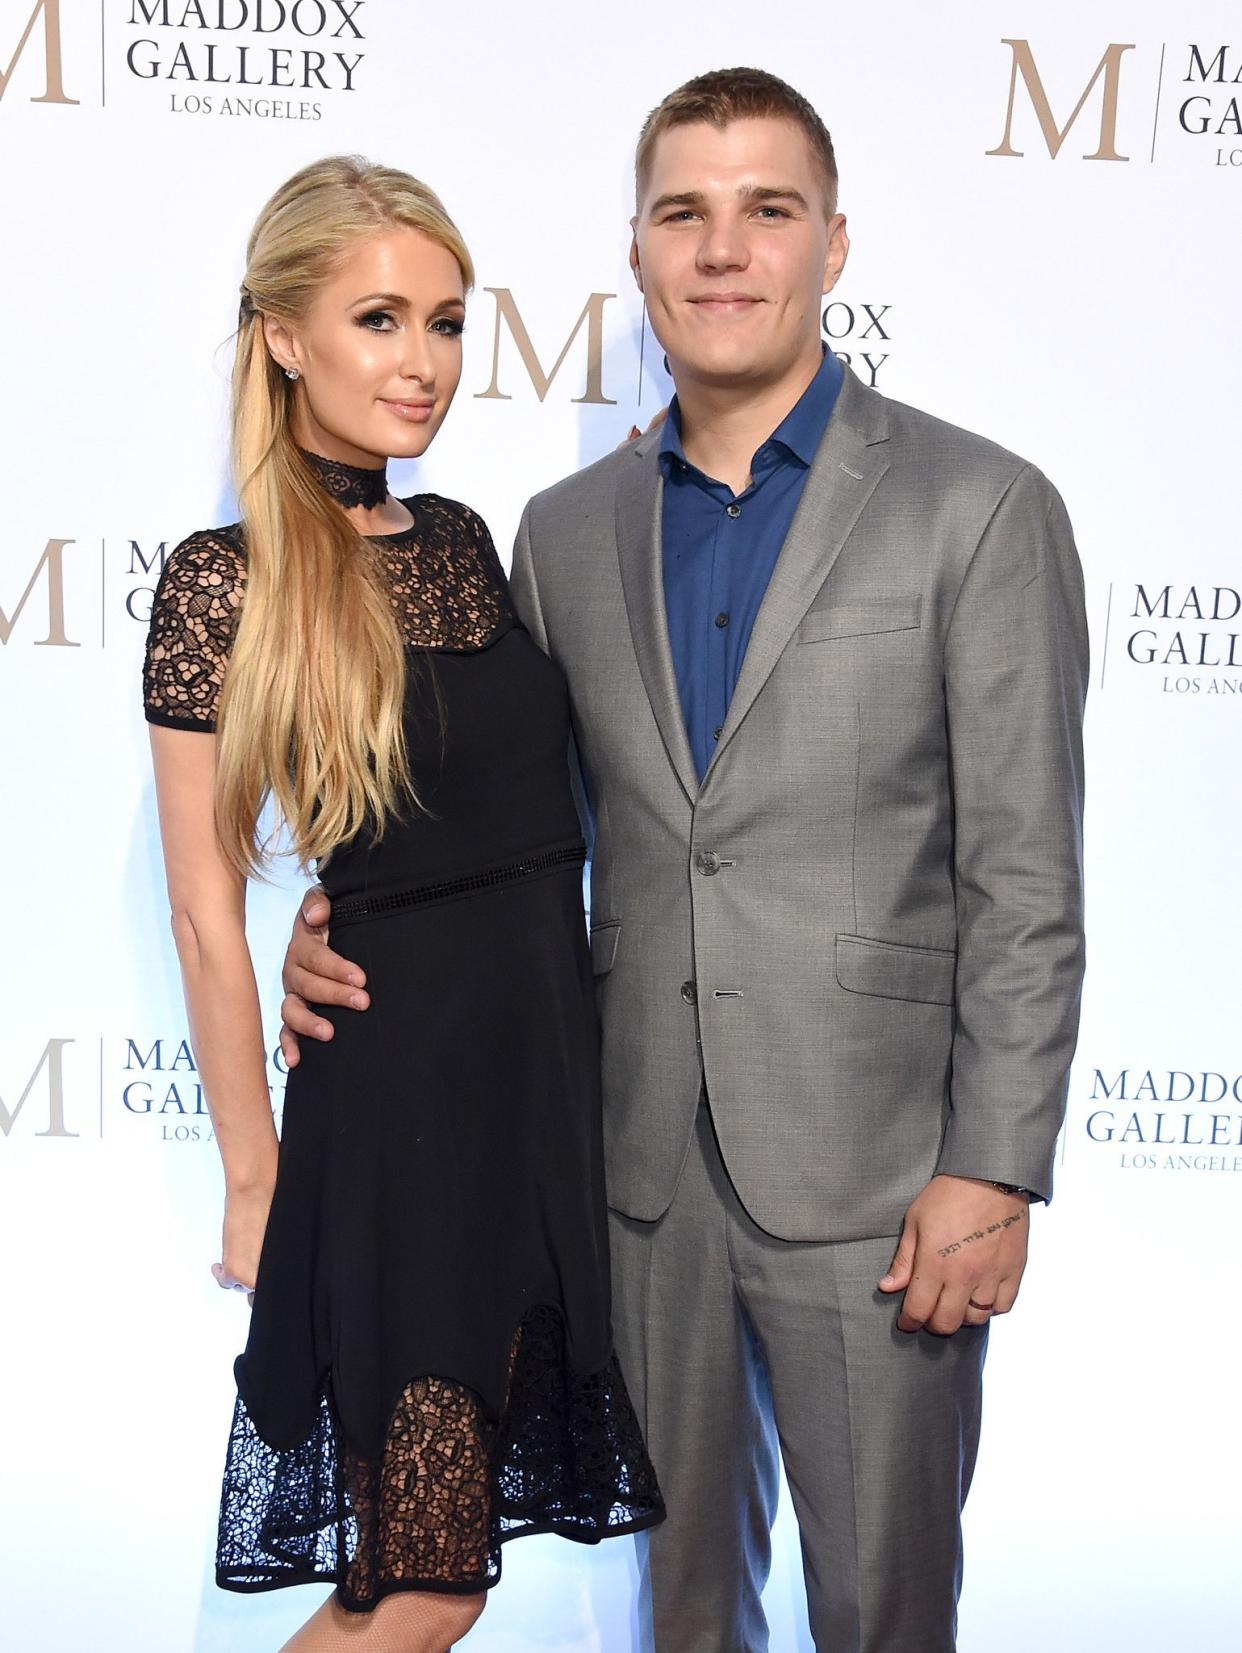 Paris Hilton and her actor fiance Chris Zylka have called off their engagement, with news of the split surfacing on Nov. 19, 2018. The couple began dating in 2017 and became engaged in January of this year, during a ski trip to Aspen. Hilton reportedly was the one to break off their engagement, stating that they were moving too fast.